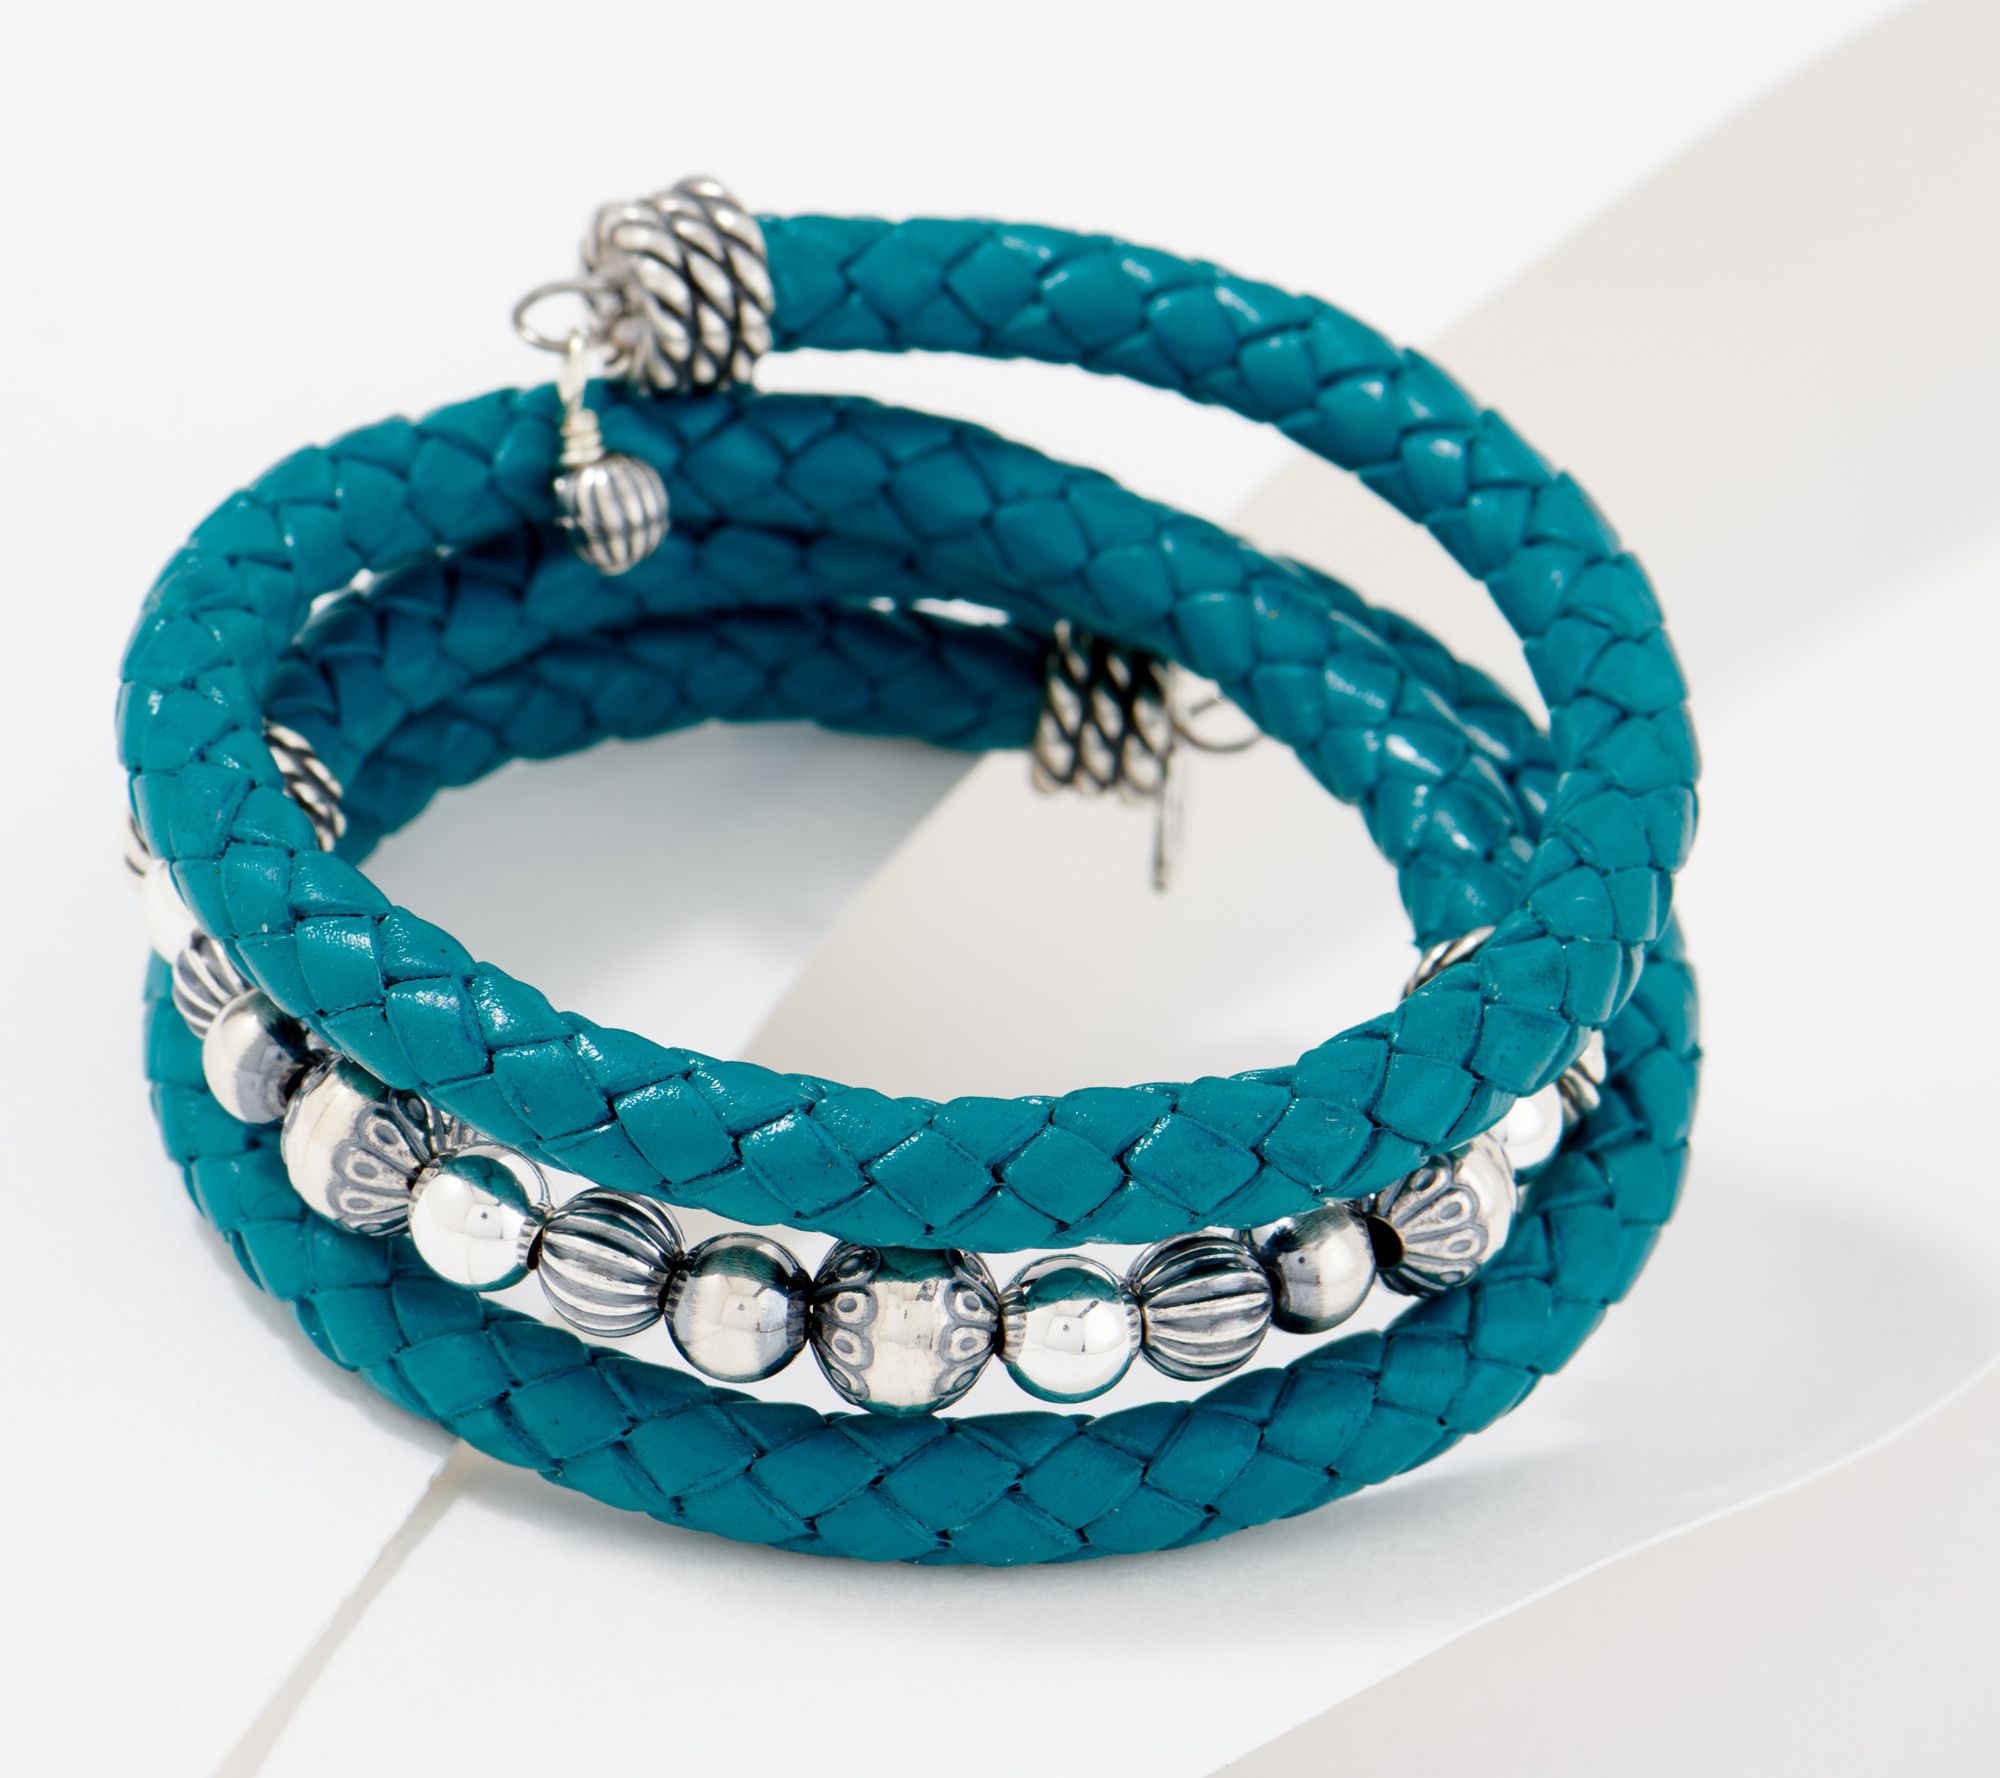 American West Braided Leather Sterling Silver Bead Coil Wrap Bracelet -  QVC.com